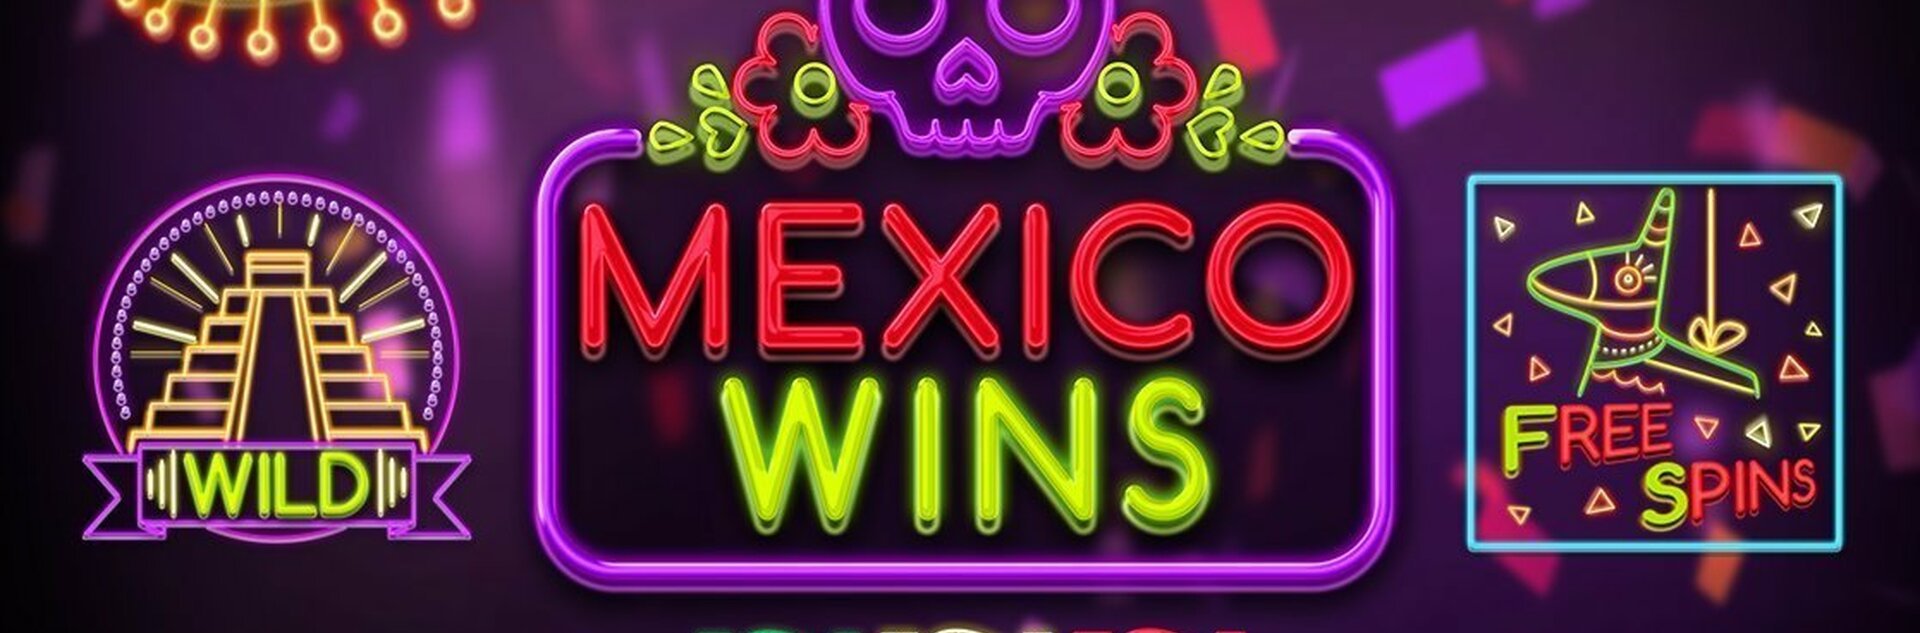 Mexico Wins Free Spins